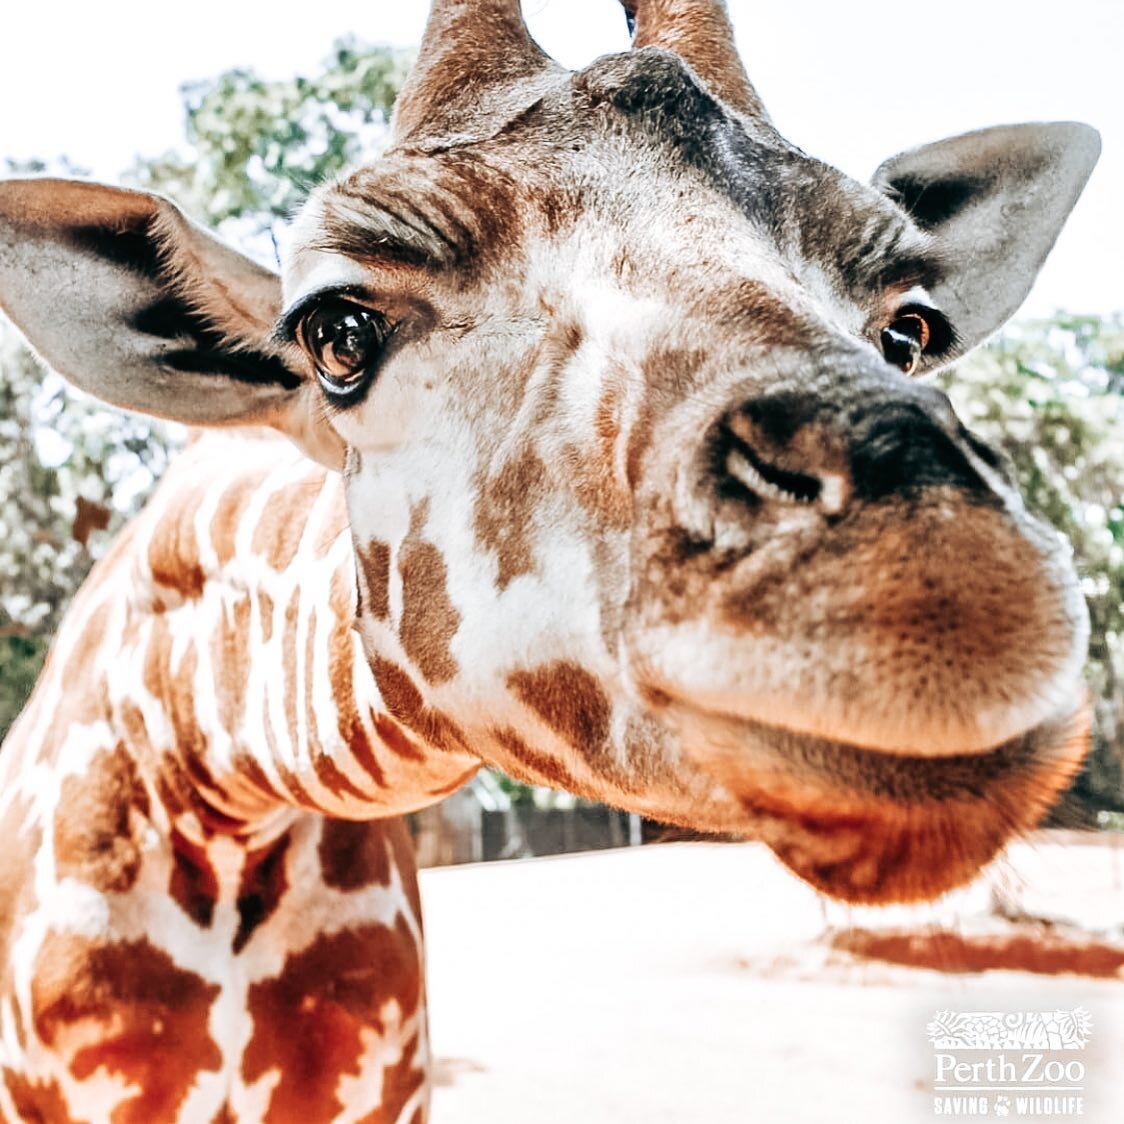 Look at this cutieface 😍#heartmelting Did you know that giraffes have exactly the same amount of teeth as humans? 😱 Yep, that&rsquo;s right - Giraffes have 32 teeth too! #funfacts Photo via @perthzoo Have you been to visit the giraffes yet? 🦒 

⁣
